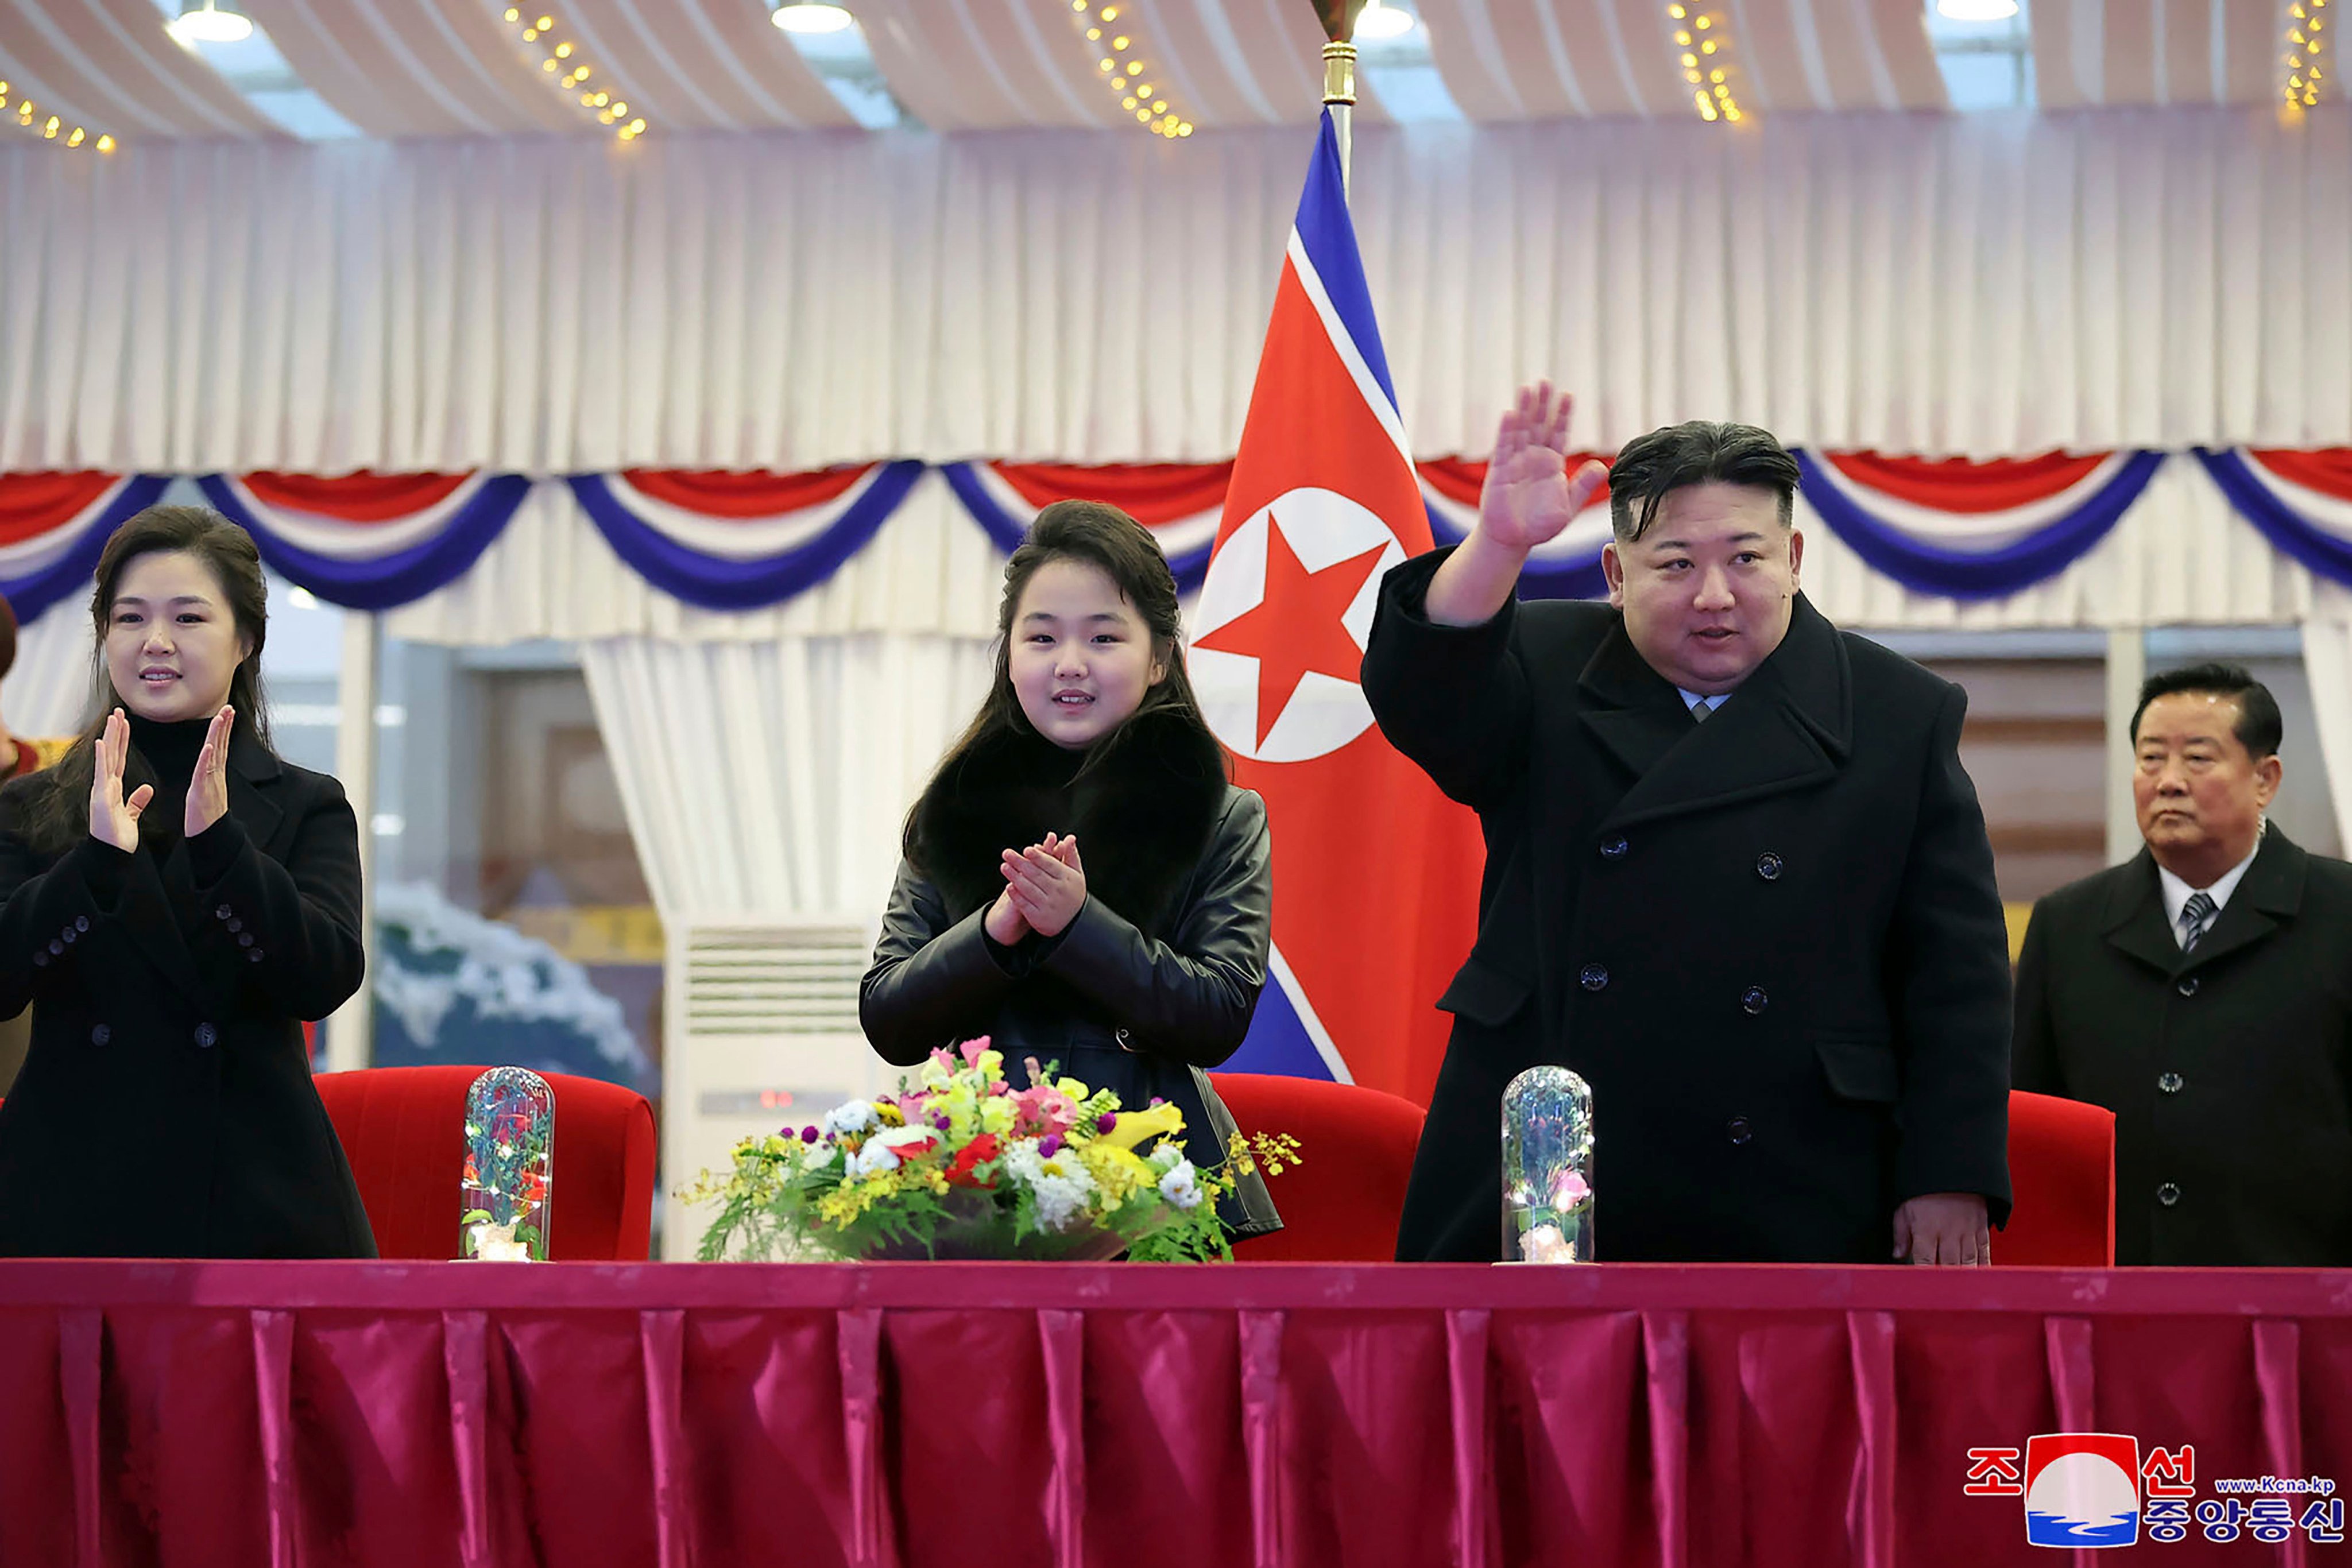 North Korean leader Kim Jong-un, (second right), with his daughter and his wife Ri Sol Ju, attends a performance to celebrate the New Year in Pyongyang on Sunday. Photo: Korean Central News Agency/Korea News Service via AP